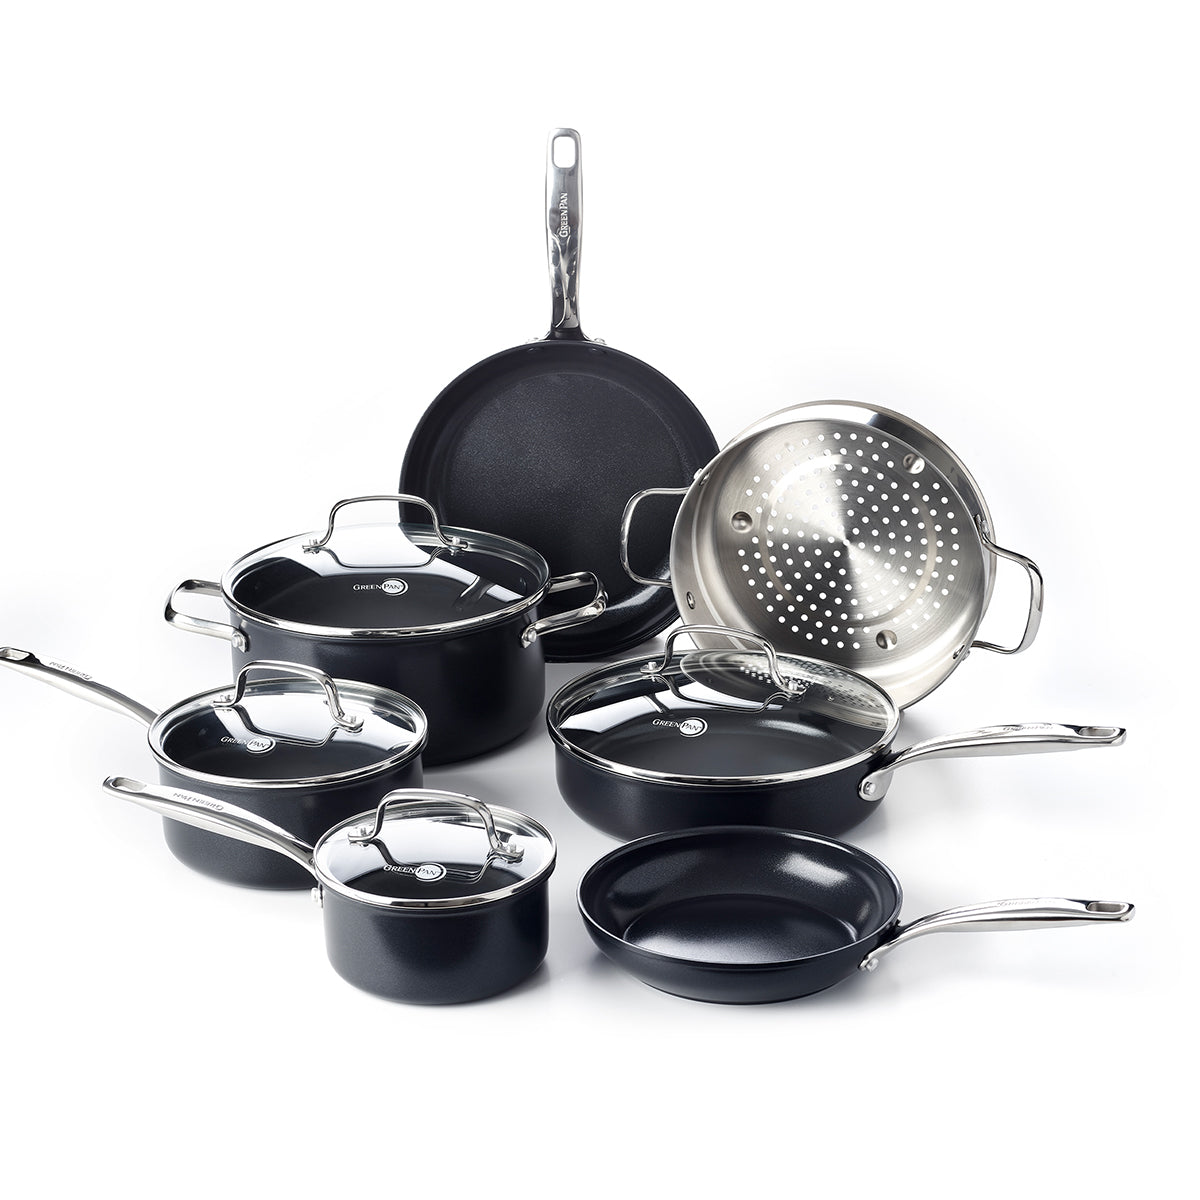 Our Complete Cookware Set Has Everything You'll Need For Healthy